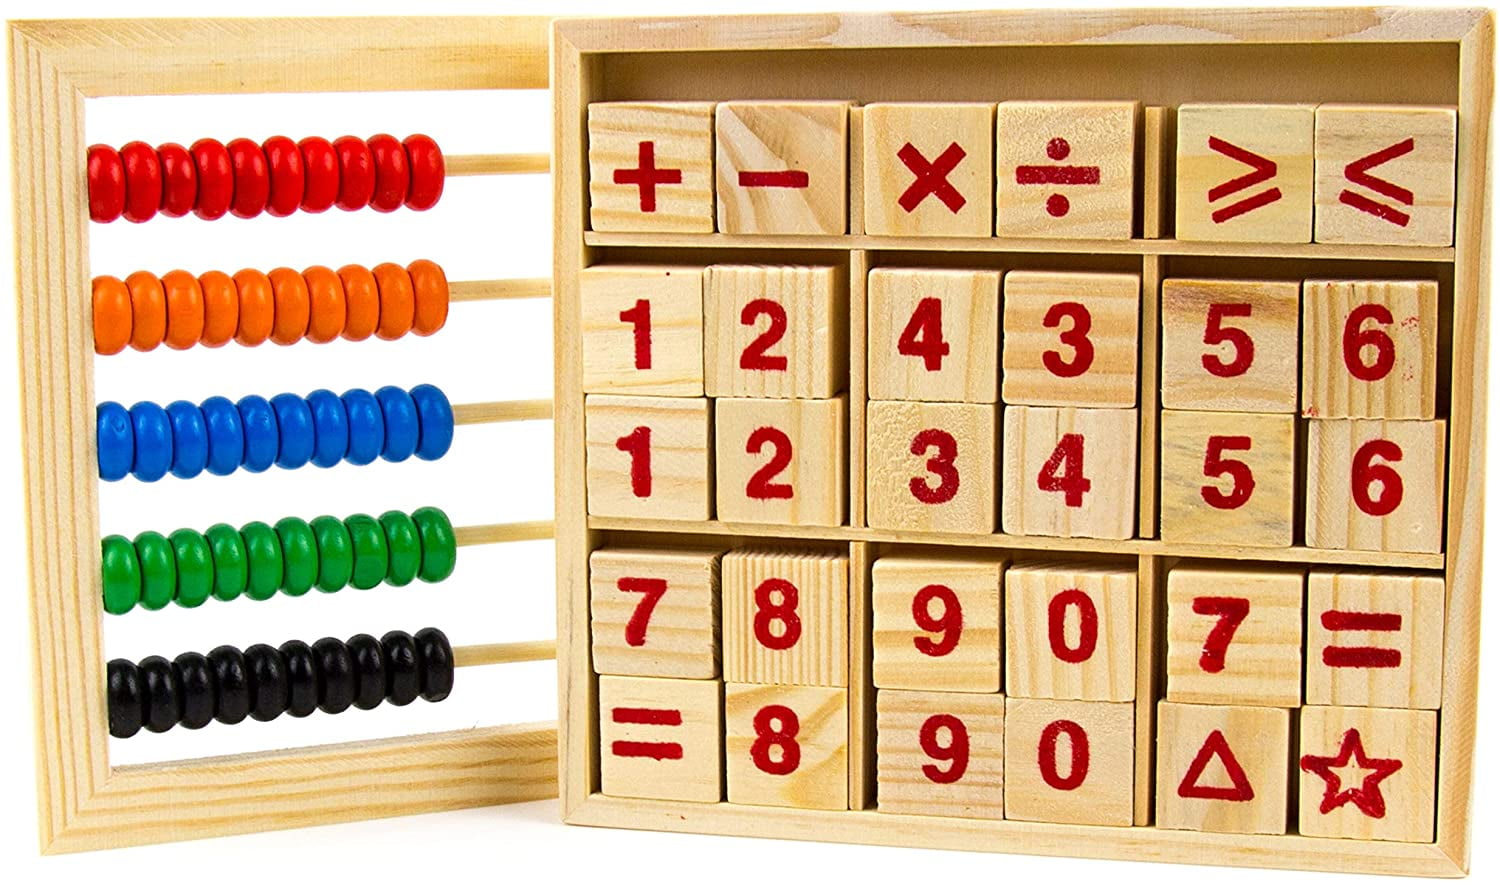 Didax Educational Resources Slide Abacus Free Shipping 